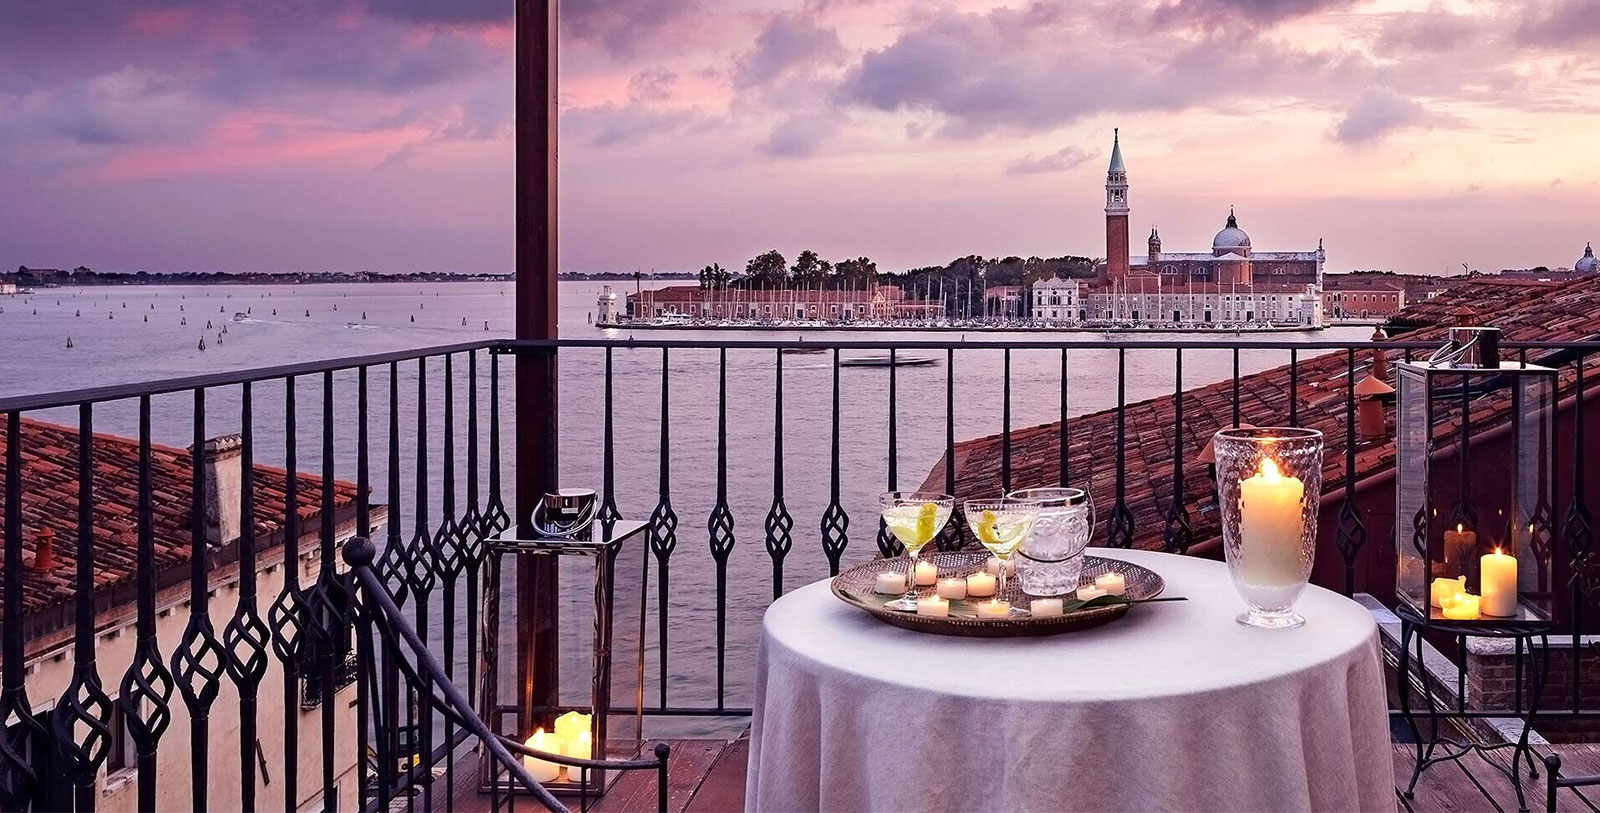 Image of Rooftop Dining at Dusk, Metropole Hotel, 1500, Member of Historic Hotels Worldwide, in Venice, Italy, Experience